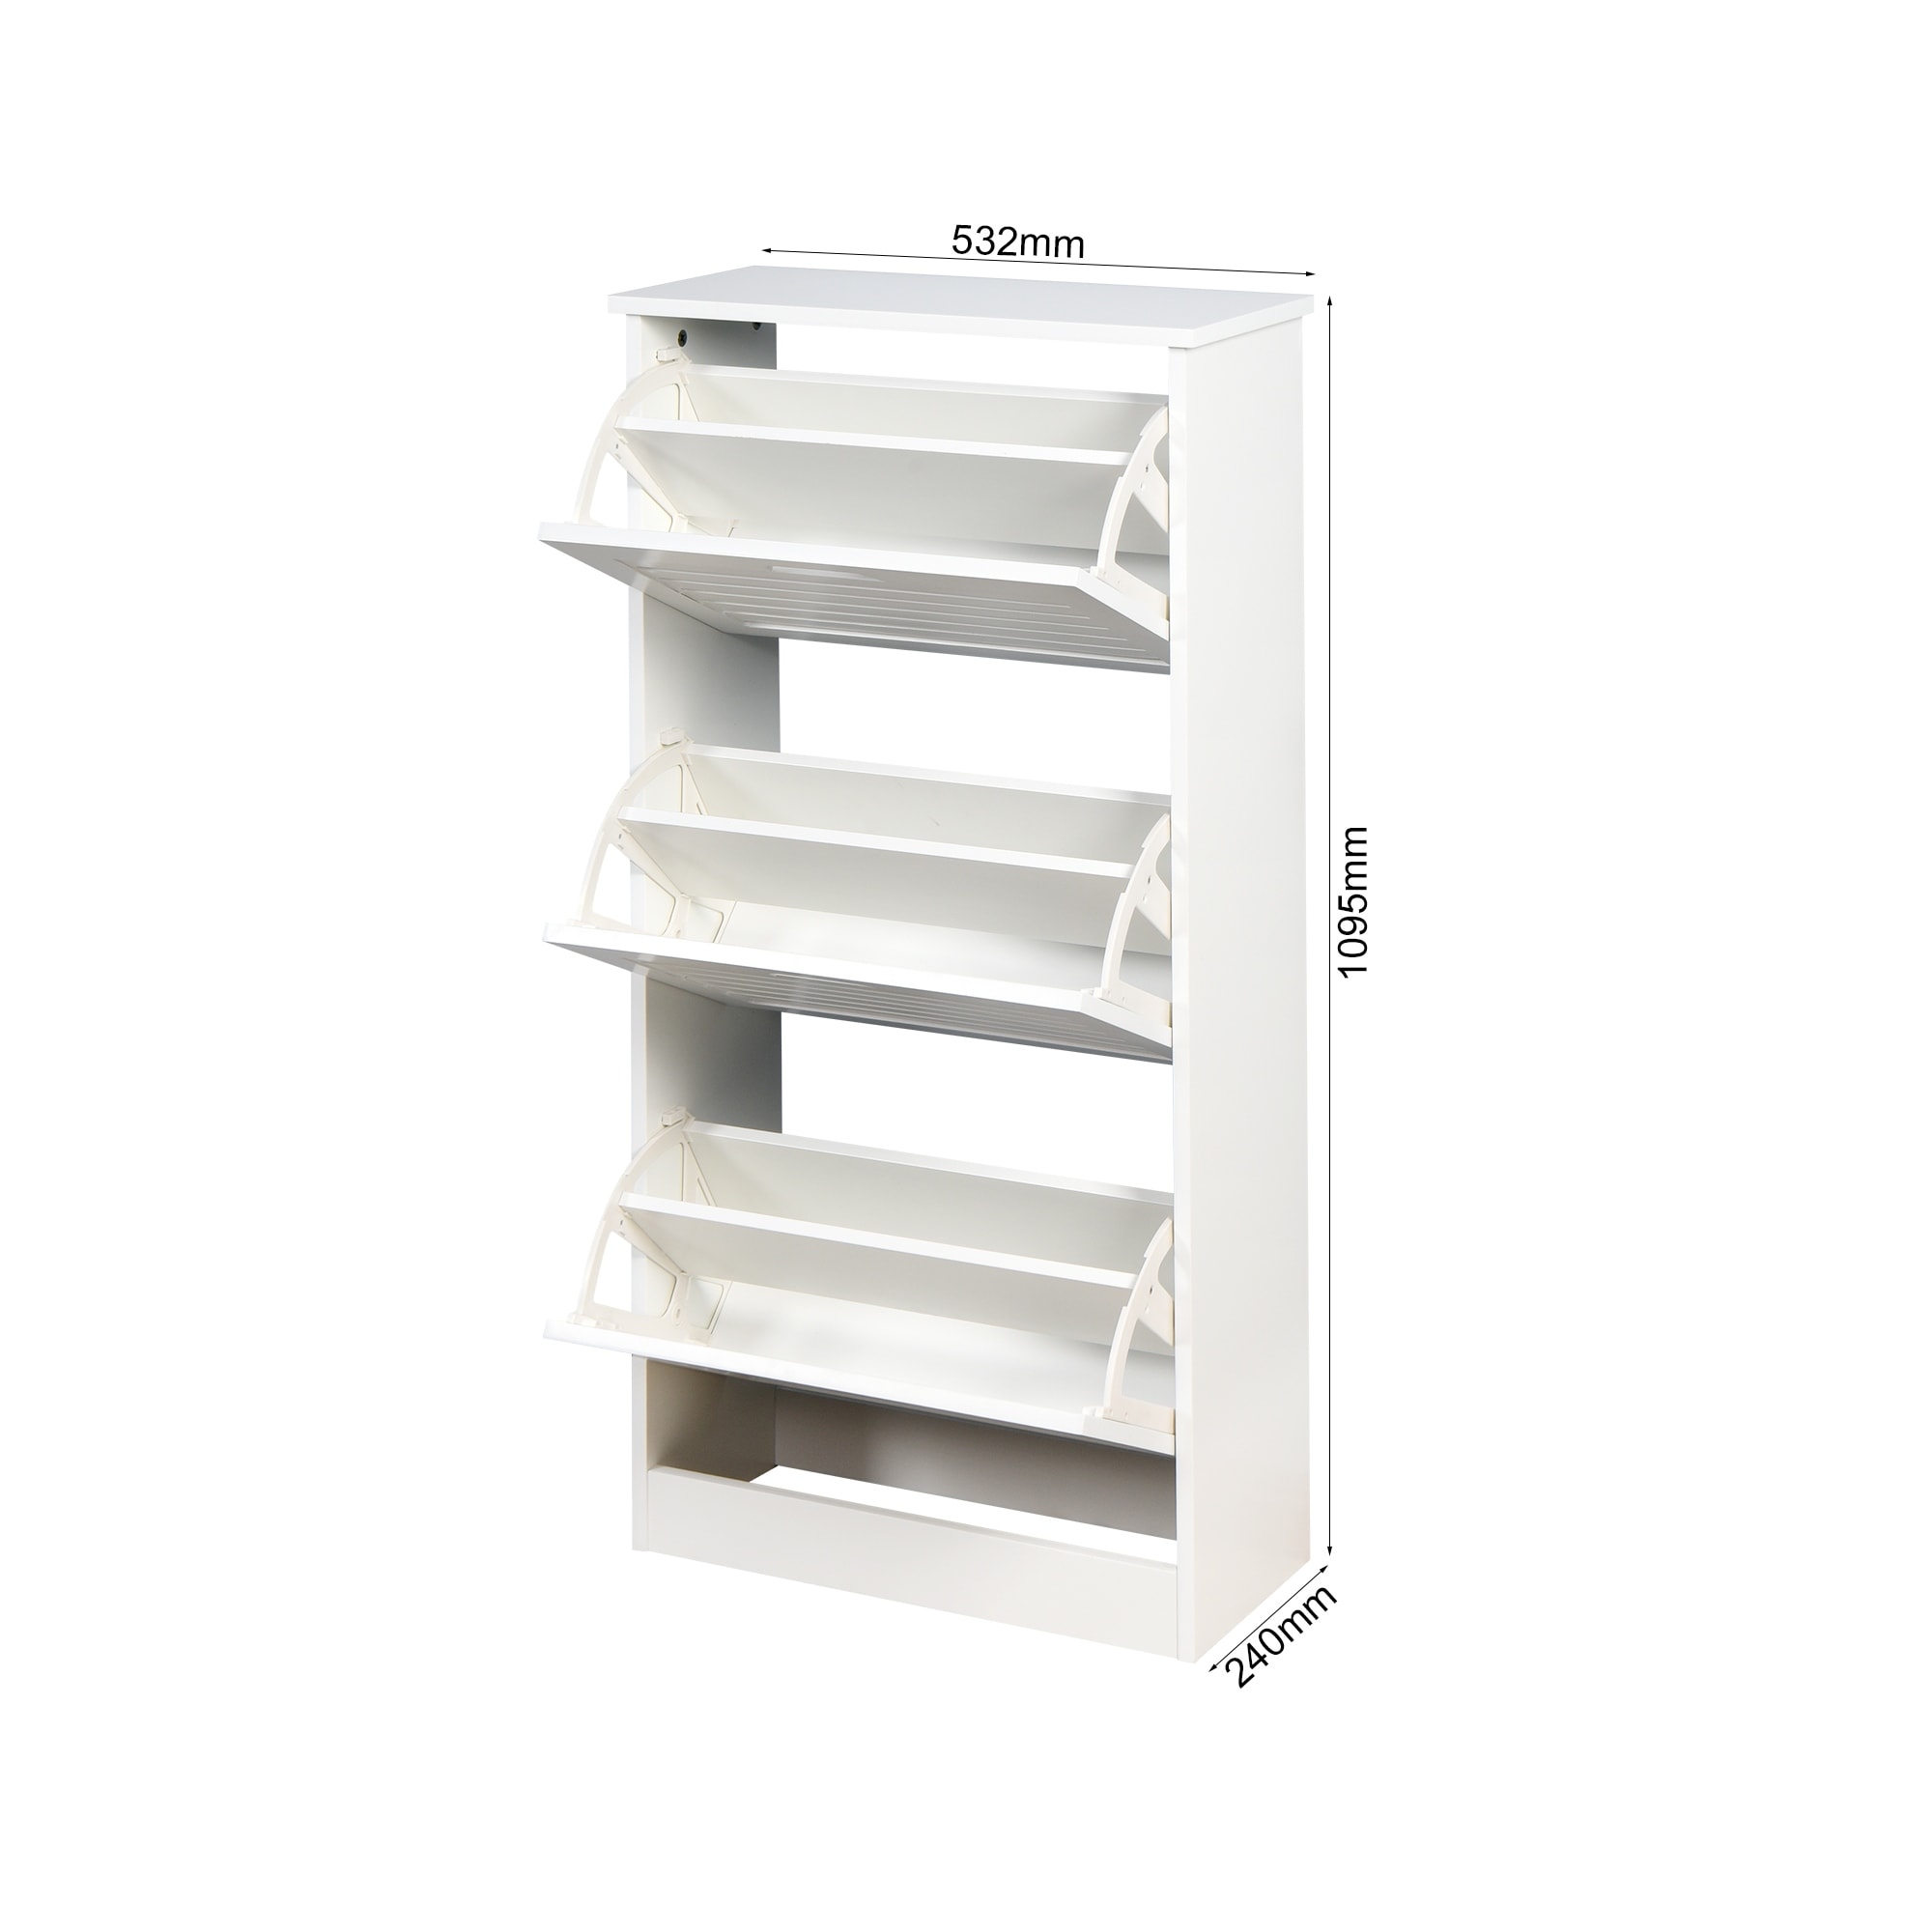 https://ak1.ostkcdn.com/images/products/is/images/direct/3f6aabb4592e9d06208c8adb23917a92d173af54/Wooden-Shoe-Cabinet-for-Entryway%2C-White-Shoe-Storage-Cabinet-with-3-Flip-Doors-20.94x9.45x43.11-inch.jpg